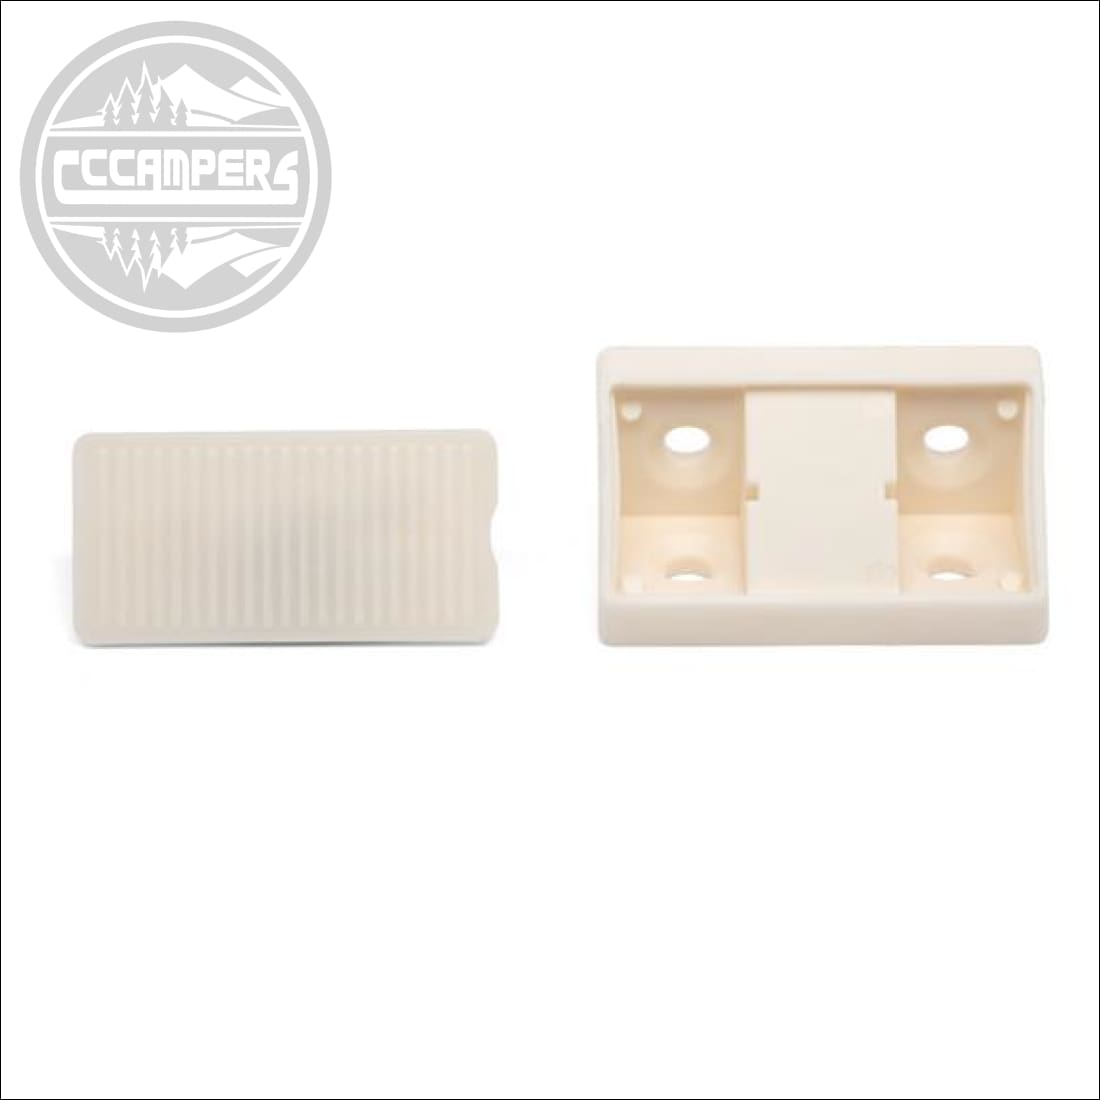 Ivory Corner Joint with Cover Conectors x 20 pcs - cccampers.myshopify.com